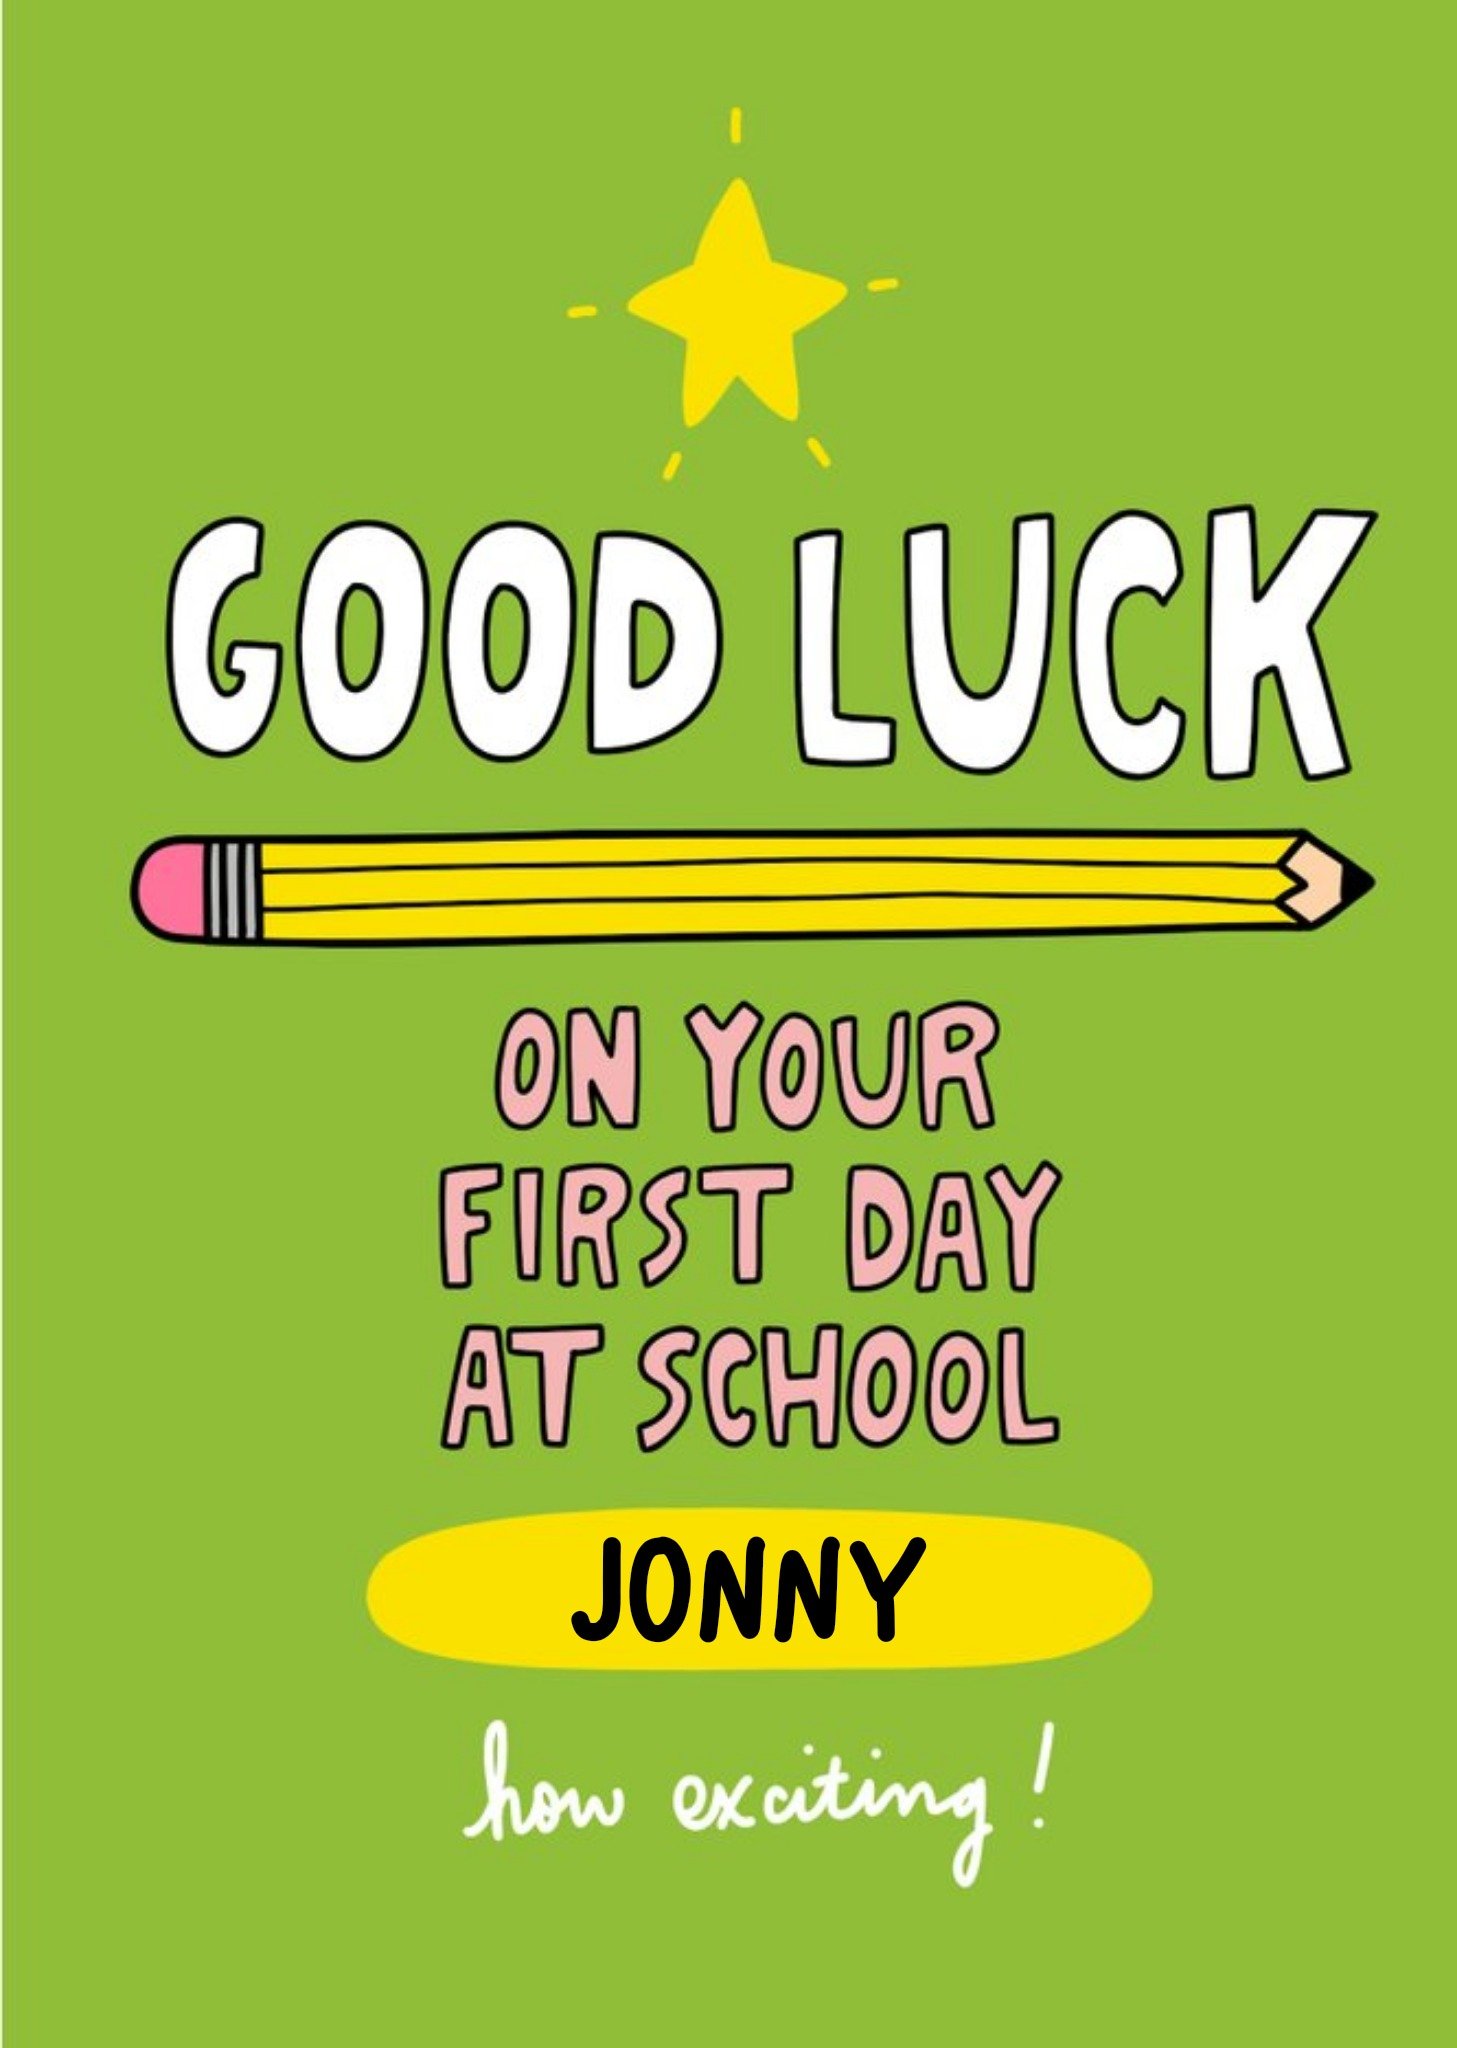 Moonpig Fun Typographic Illustrated Pencil First Day Good Luck Card Ecard